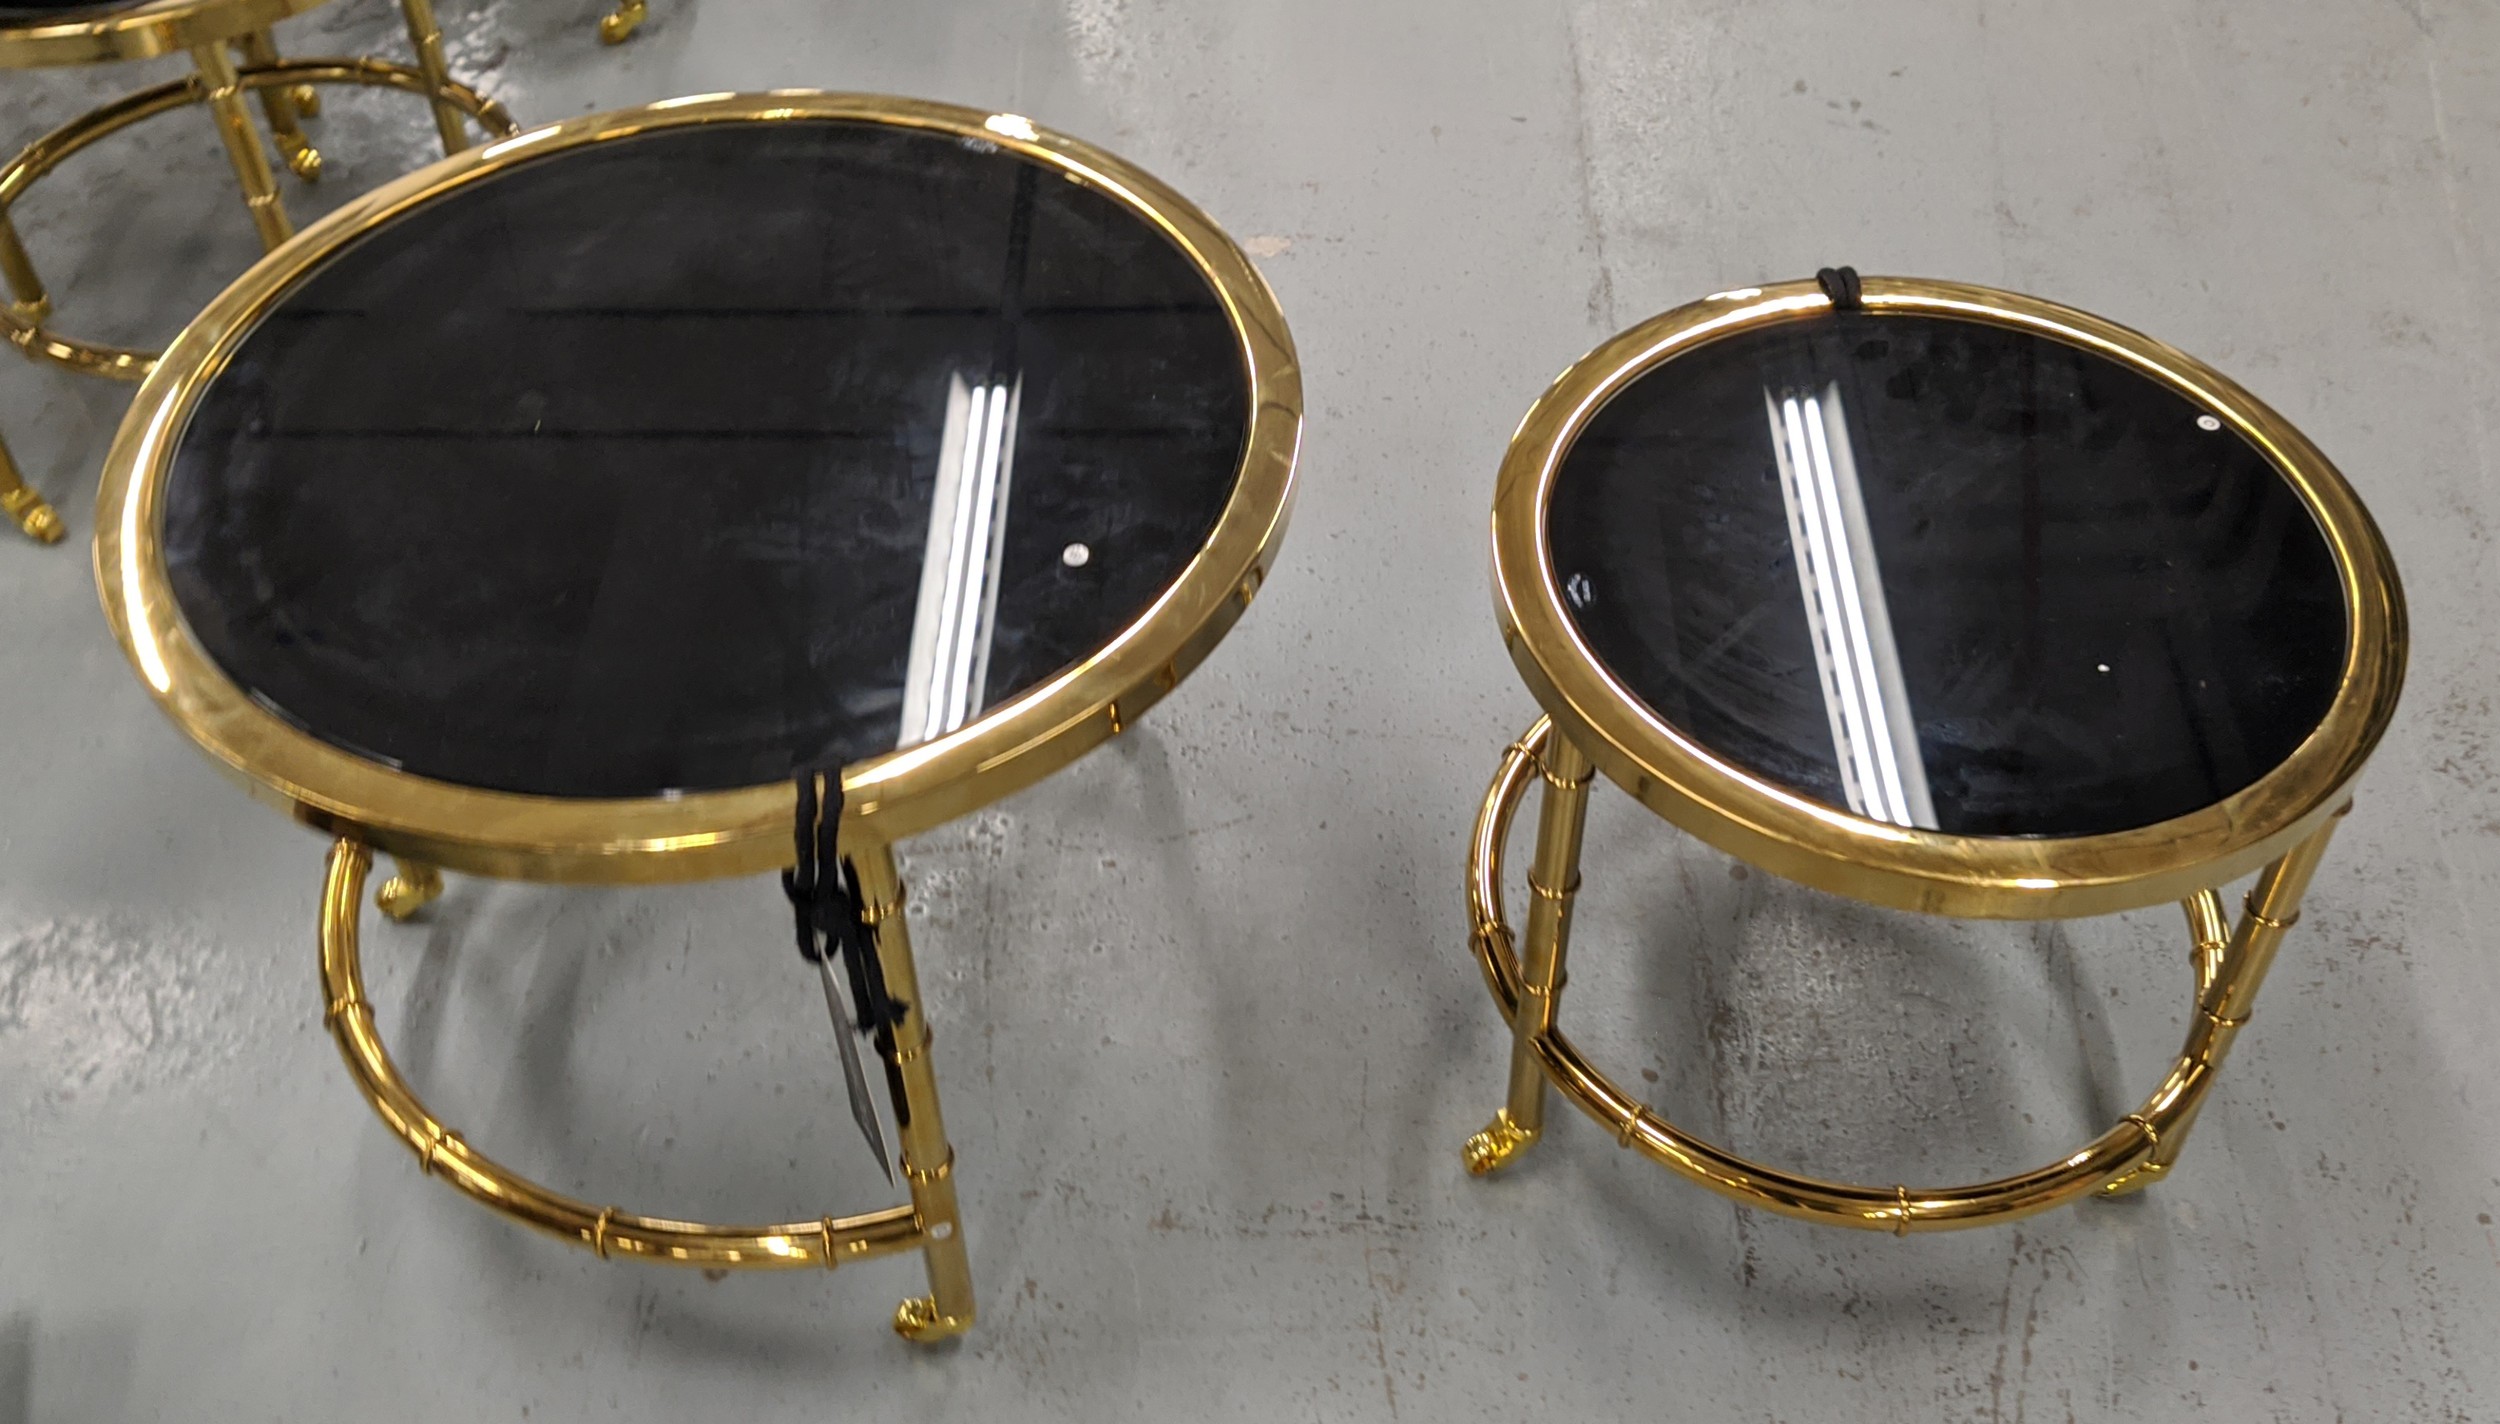 EICHHOLTZ 'NESTOR' SIDE TABLES, a set of two, the black glass tops, largest 55cm W x 46cm H. (2) - Image 4 of 6